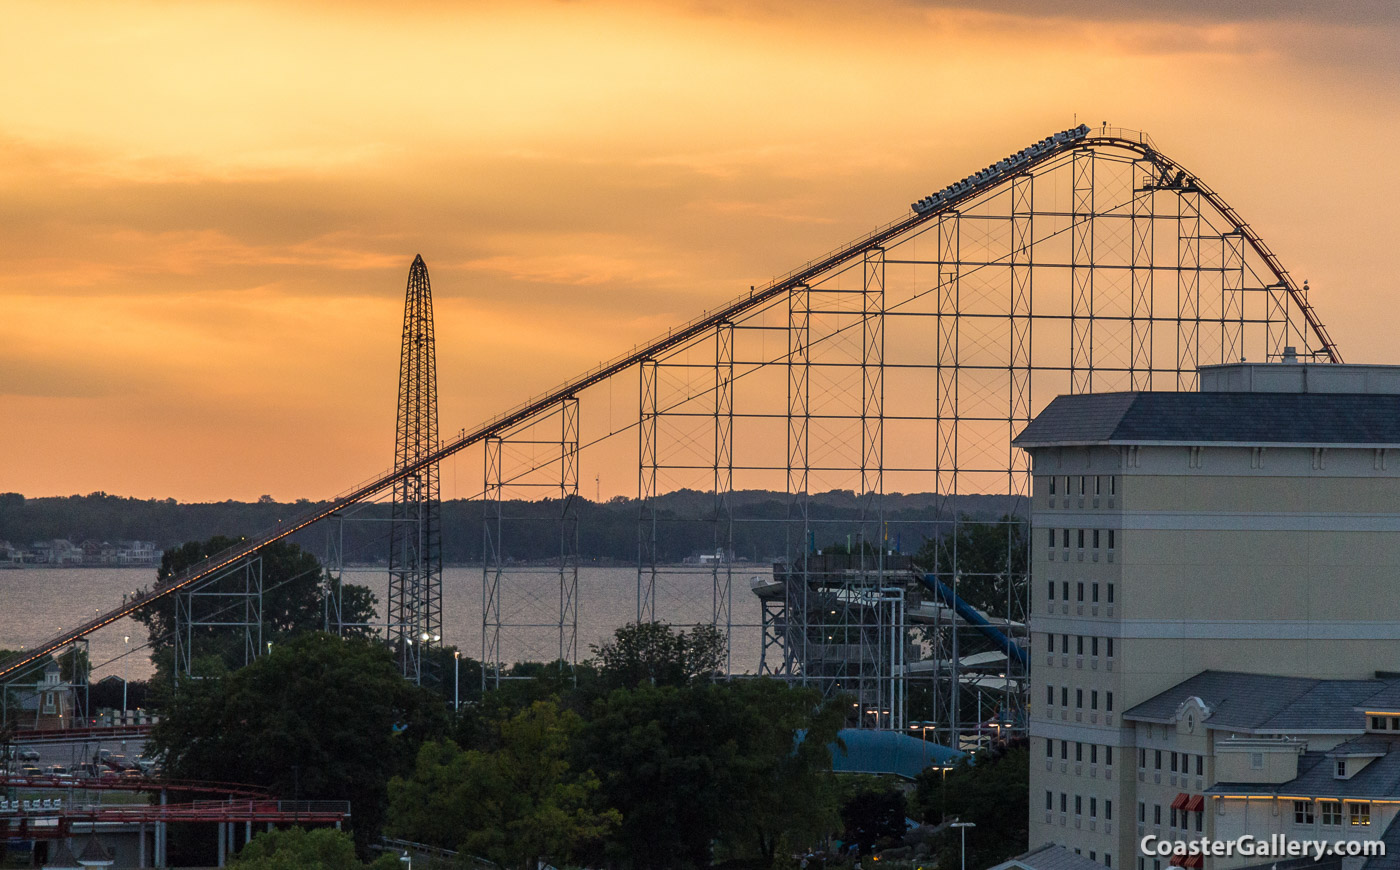 Magnum XL-200 and the Cedar Point Ripcord skycoaster